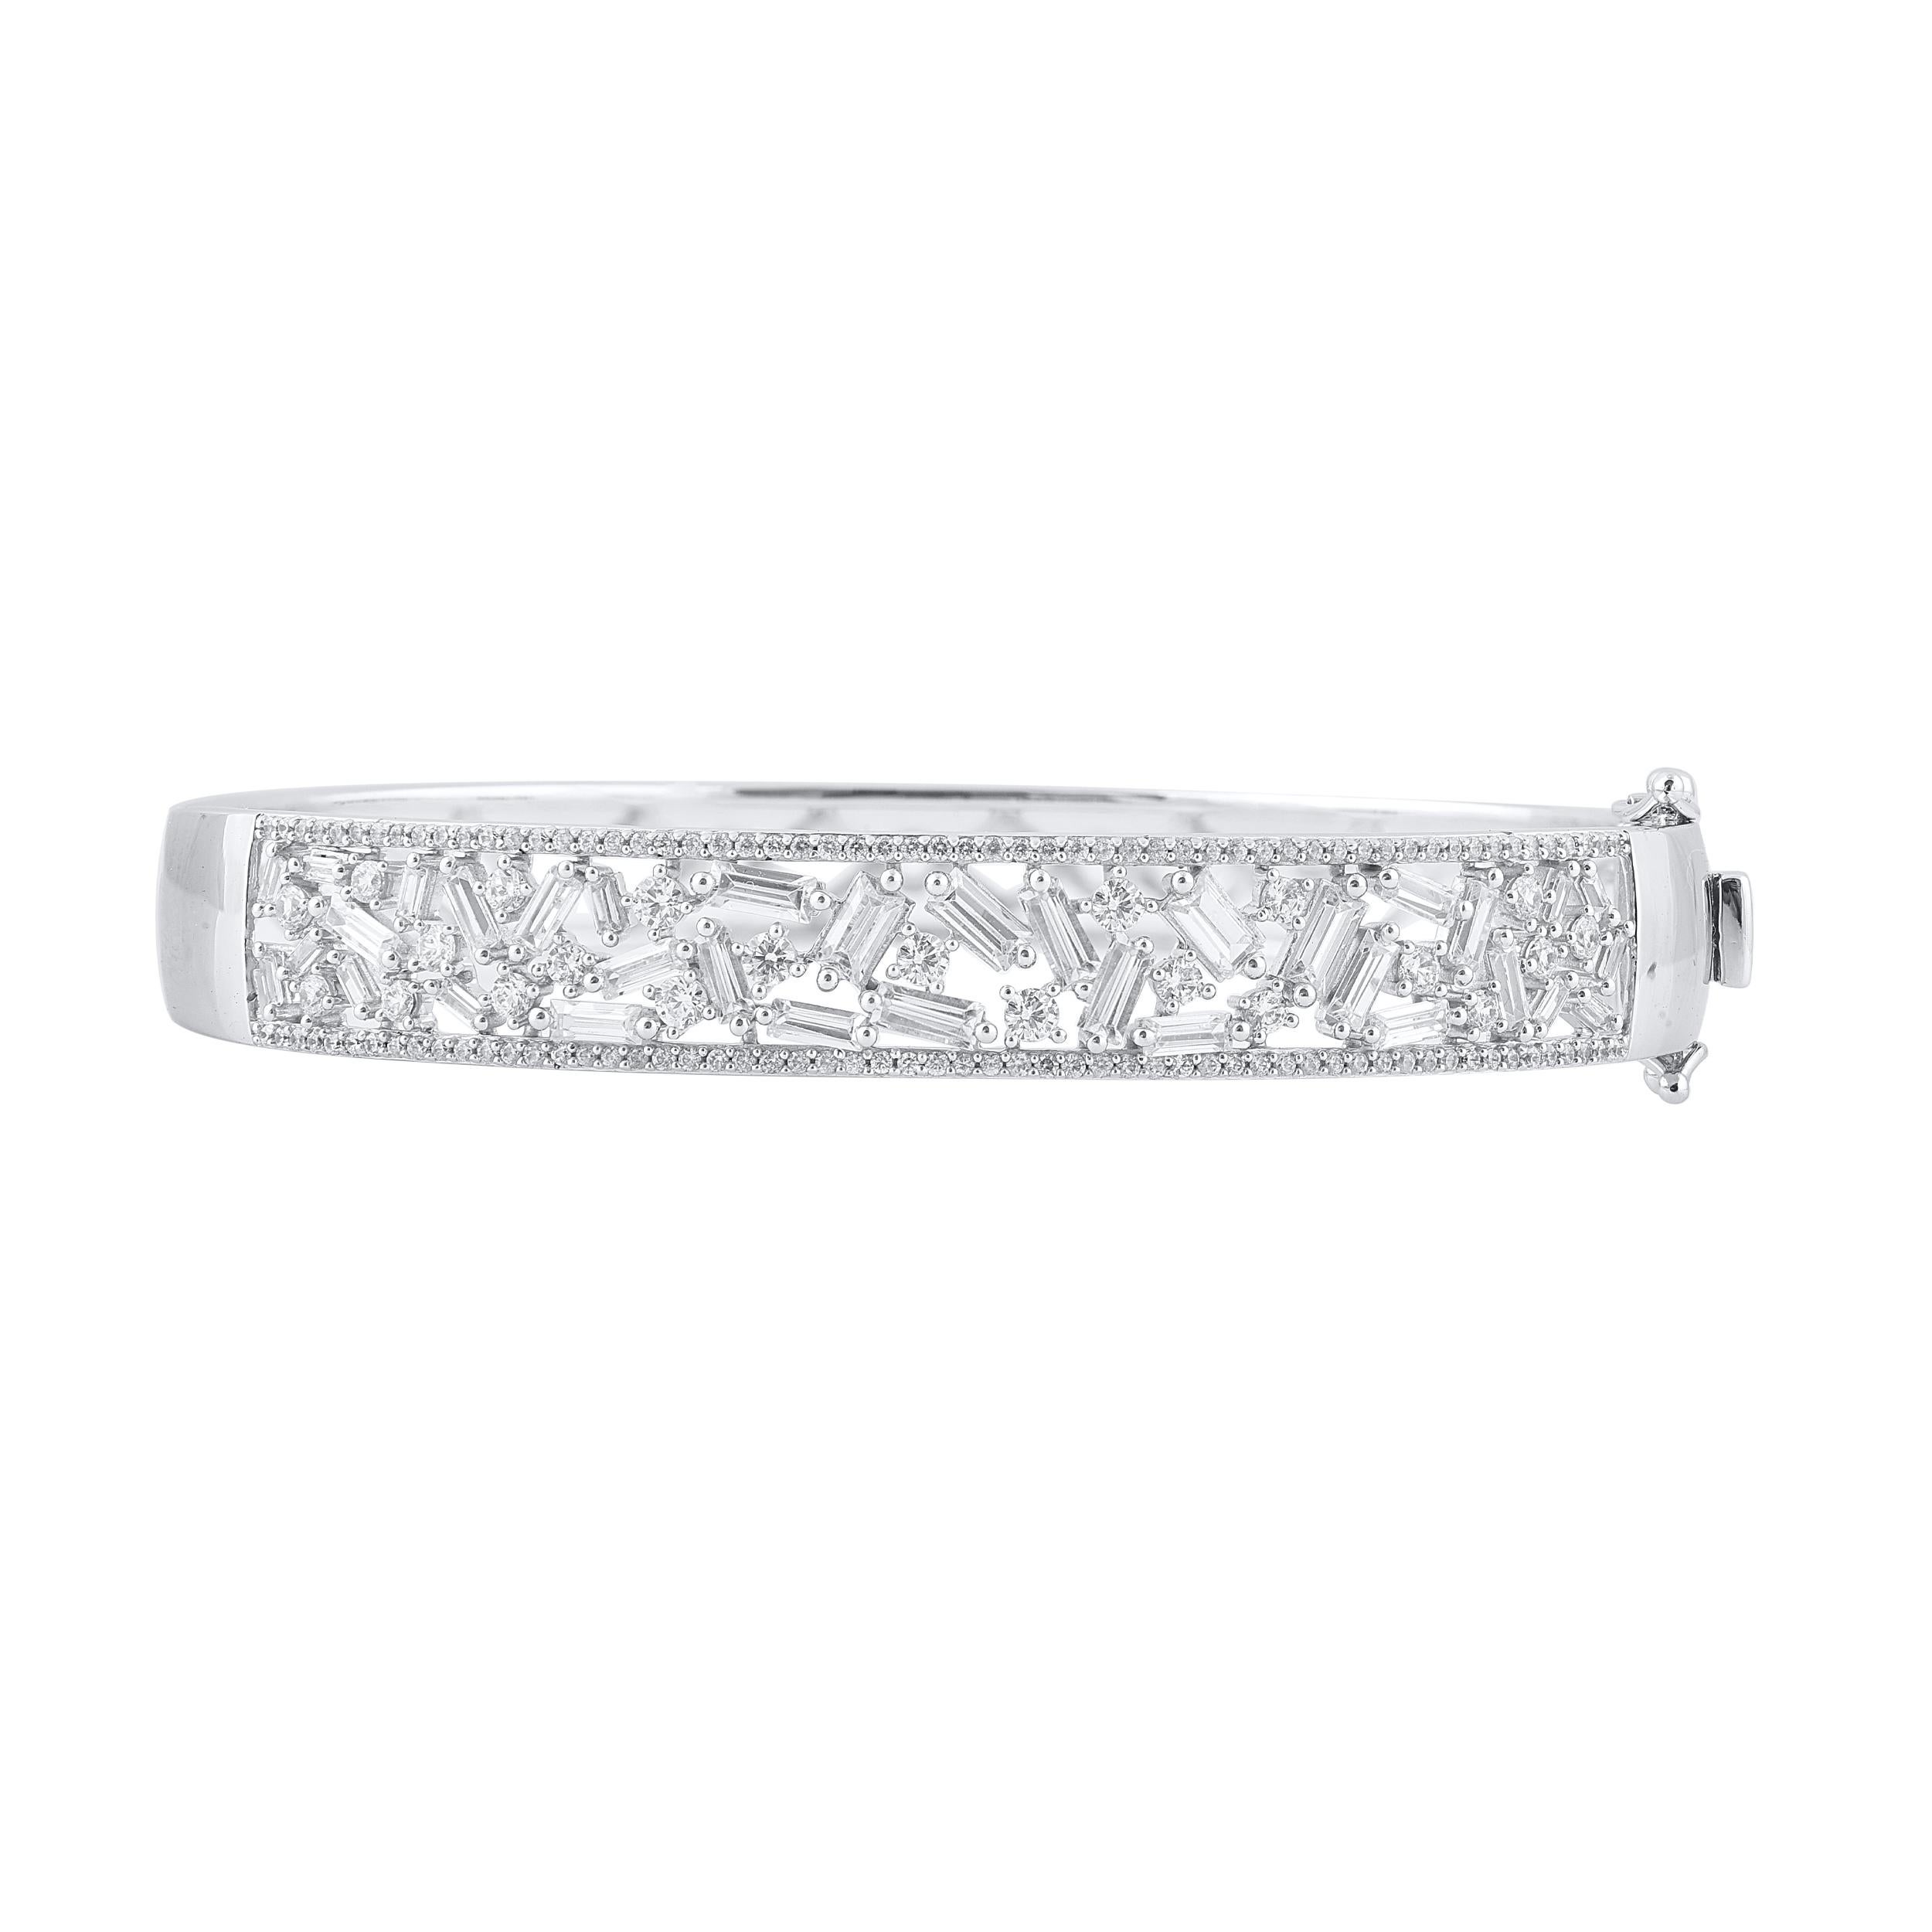 Make that special occasion even more special with this glistening diamond bangle bracelet. This Shimmering bangle bracelet features 172 natural round single cut, brilliant cut & baguette diamonds in prong setting and crafted in 14kt white gold.